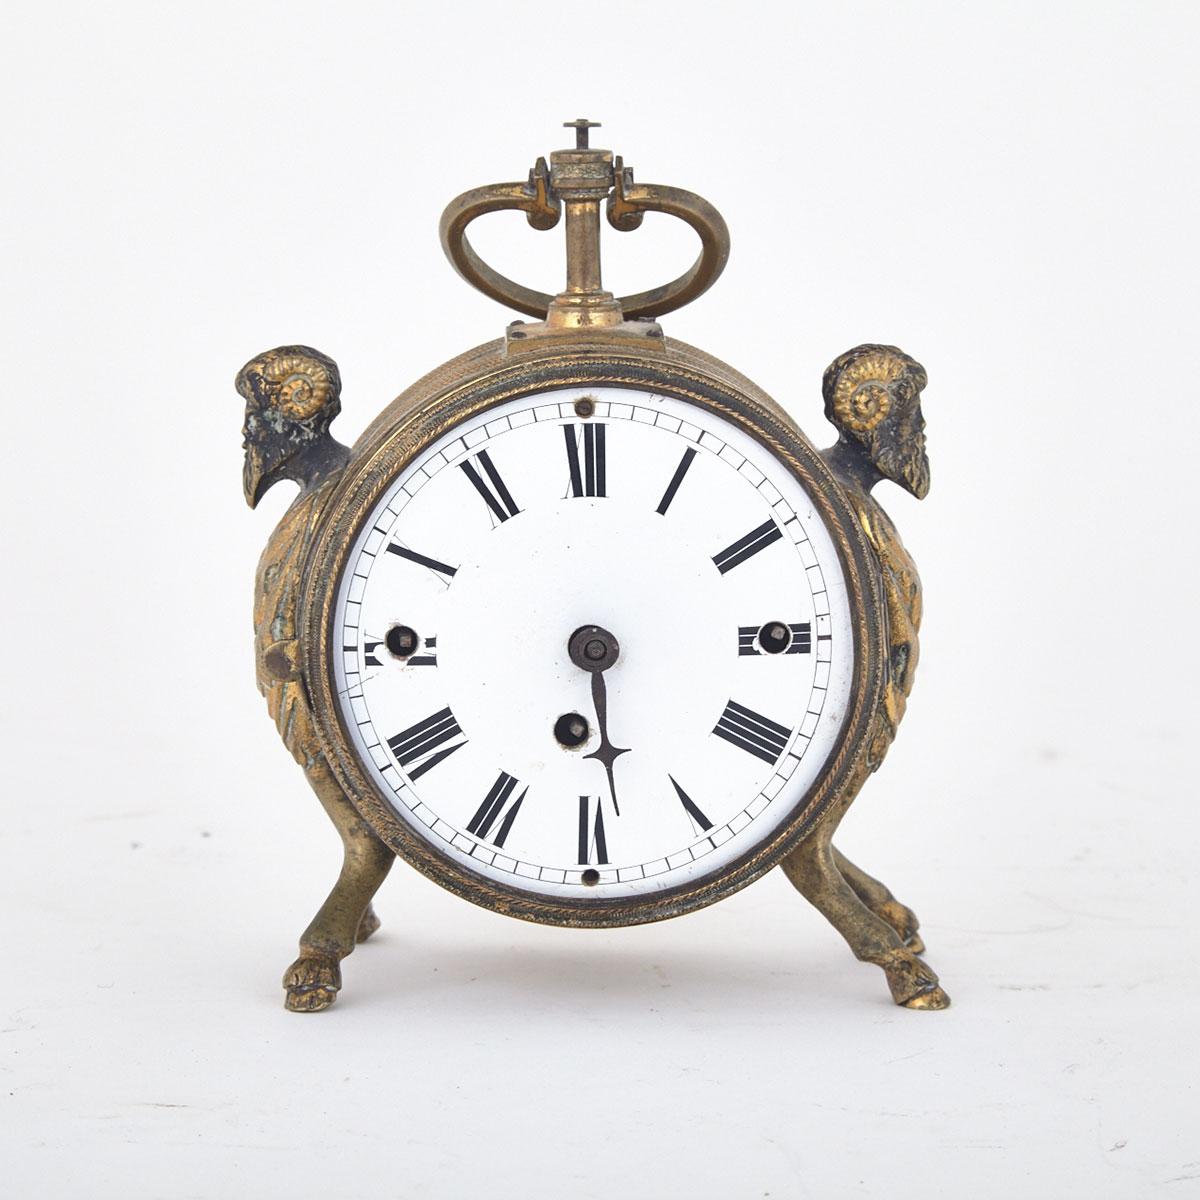 Austrian Gilt and Patinated Bronze Grande Sonnerie Repeating Table Clock, early 19th century